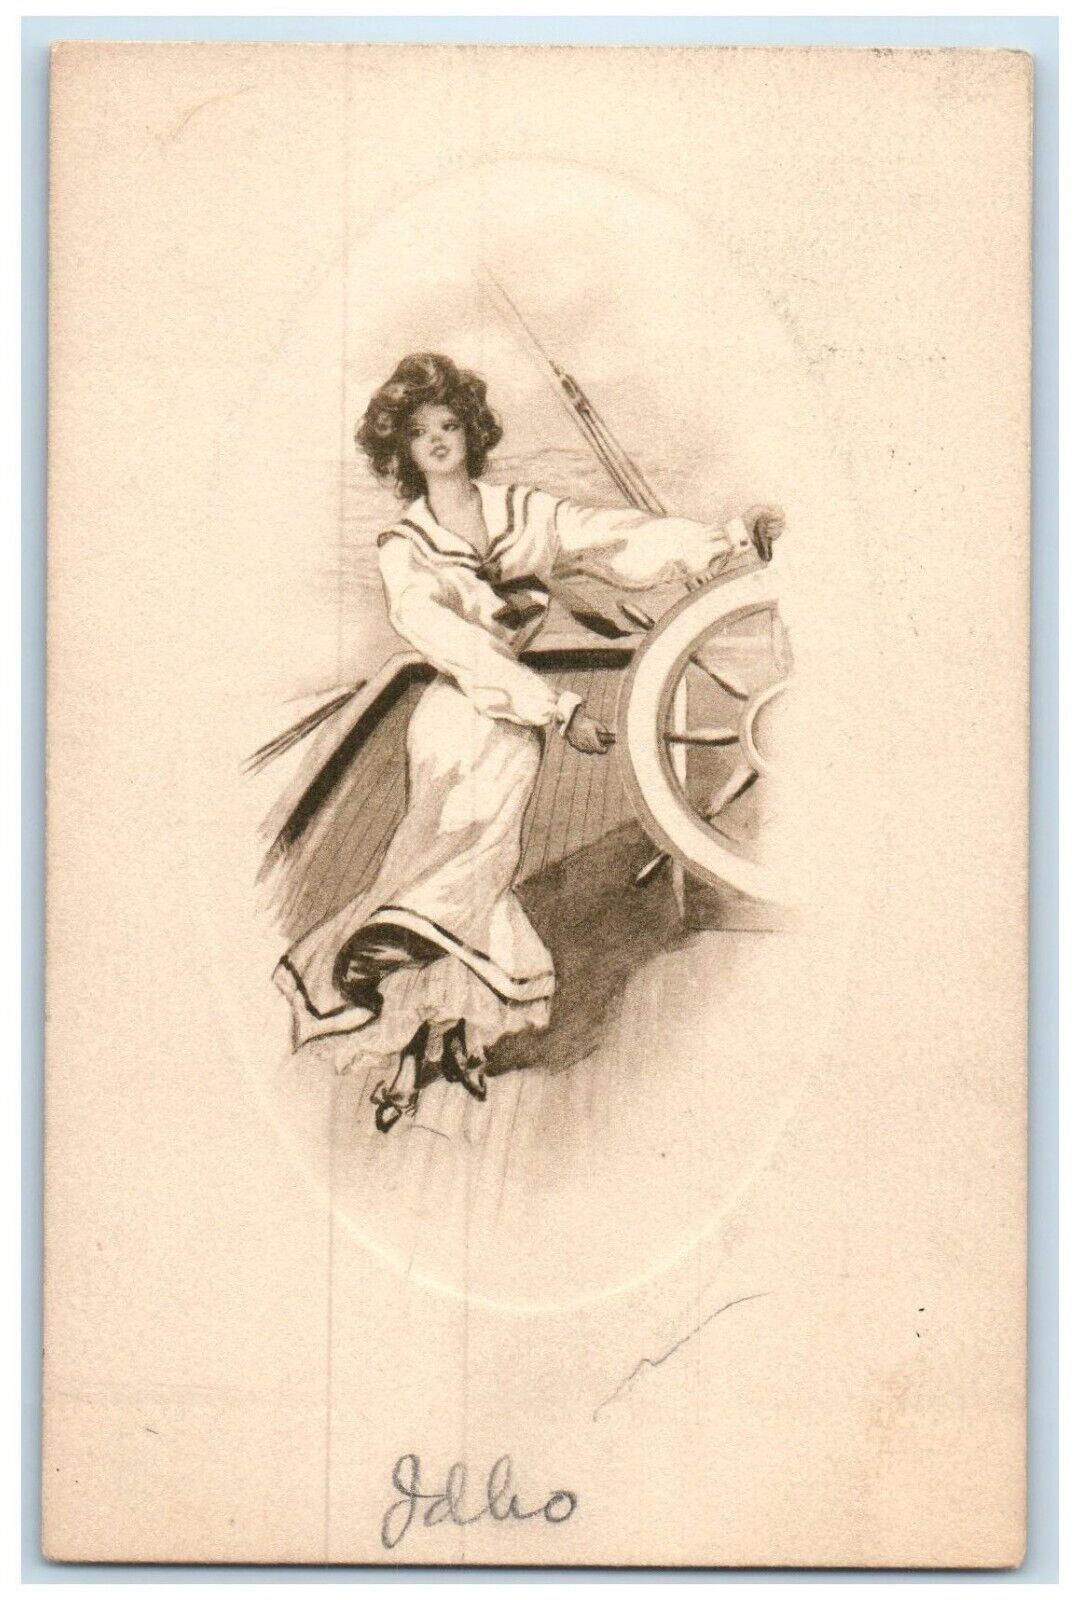 1910 Pretty Woman Curly Hair Helm Boat Chicago Illinois IL RPO Antique Postcard